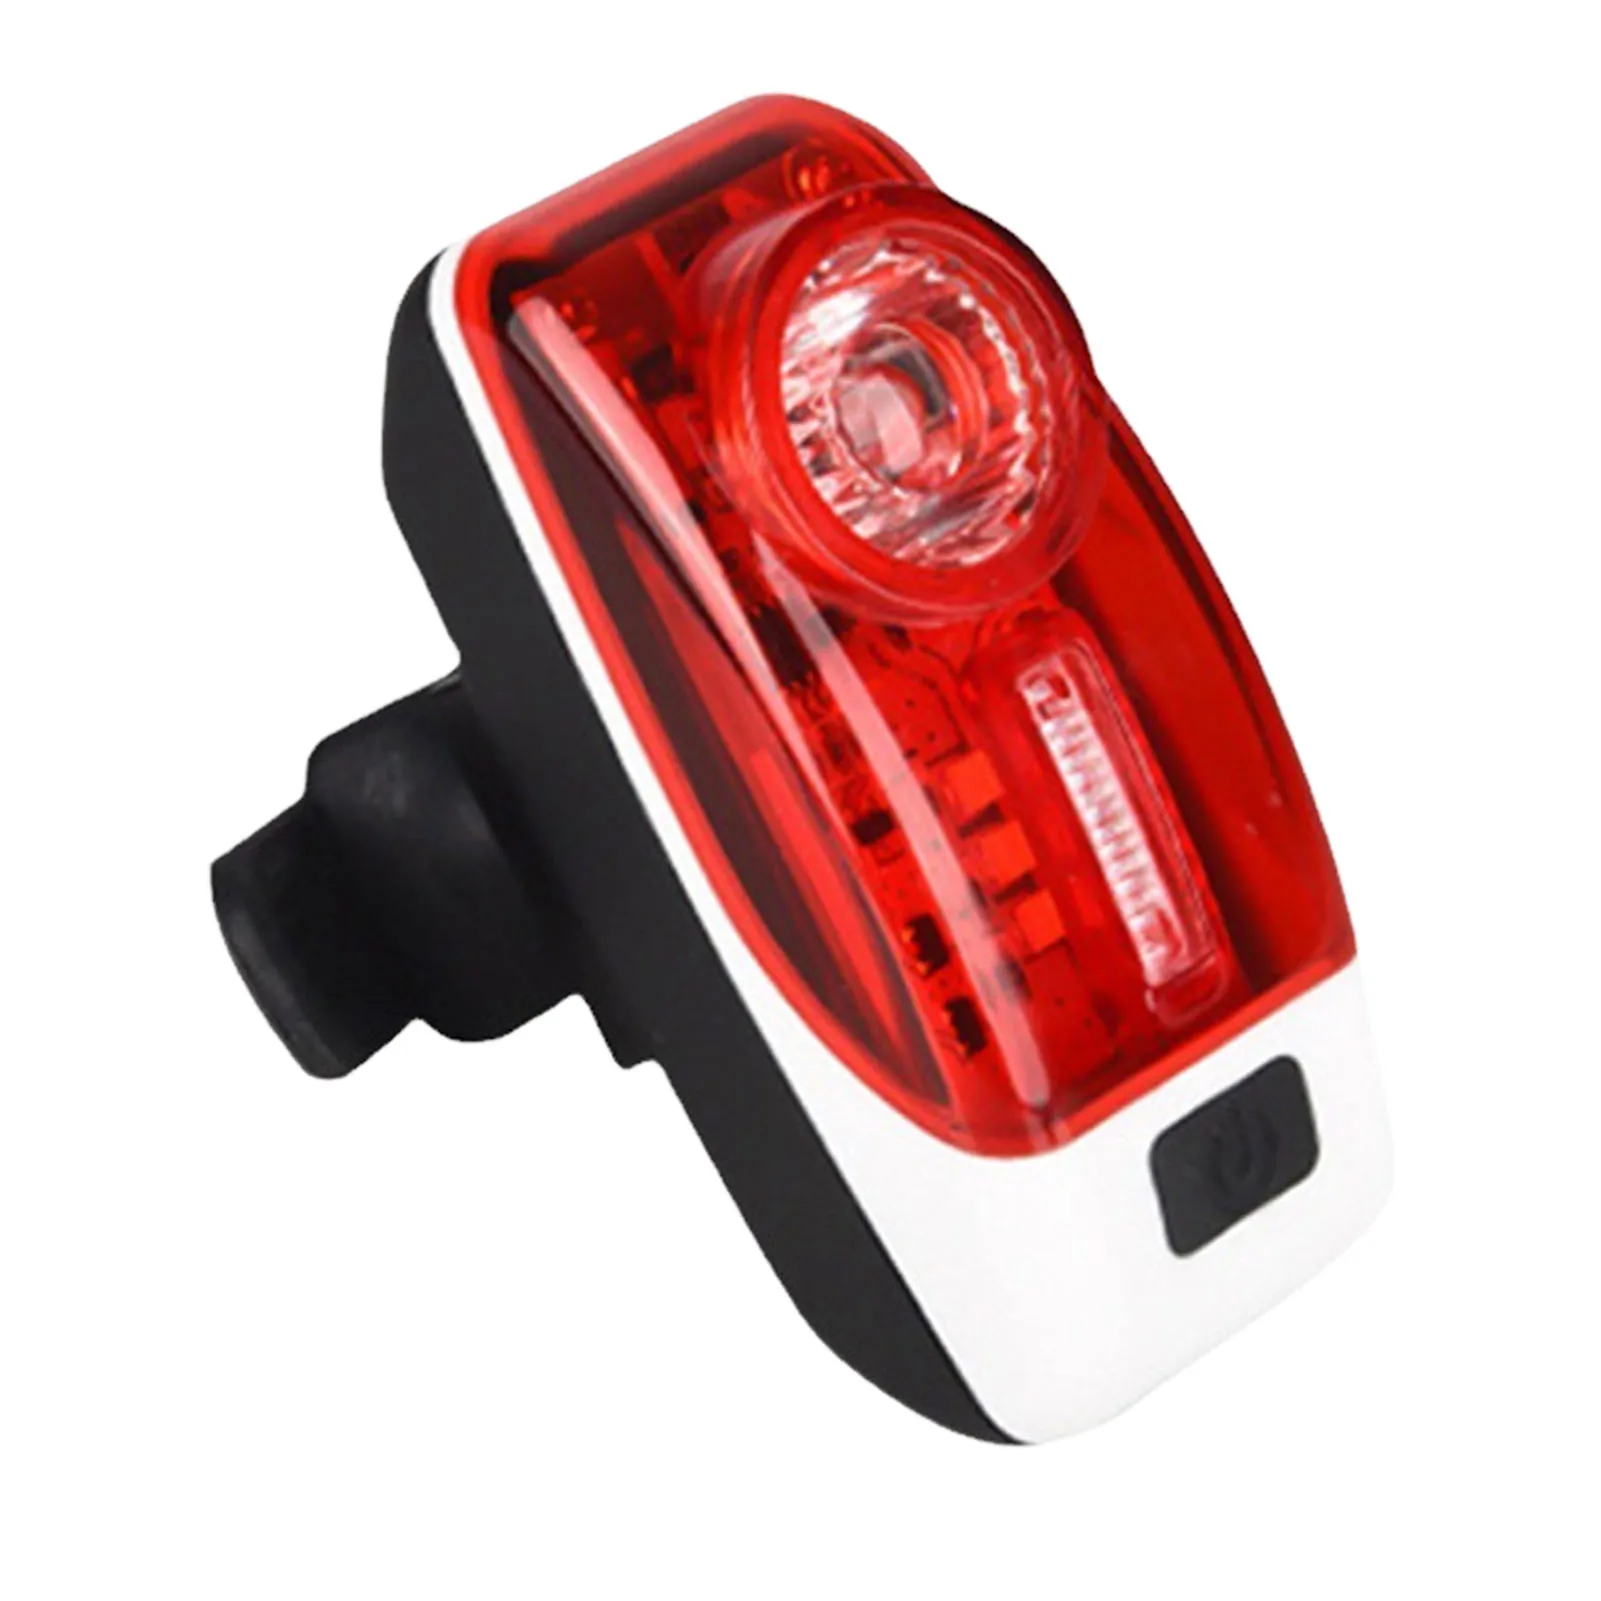 

High-Brightness Bicycle Tail Light Bike Tail Light With 5 Lighting Modes Fast Charging City Commuting Cycling Safety Warning